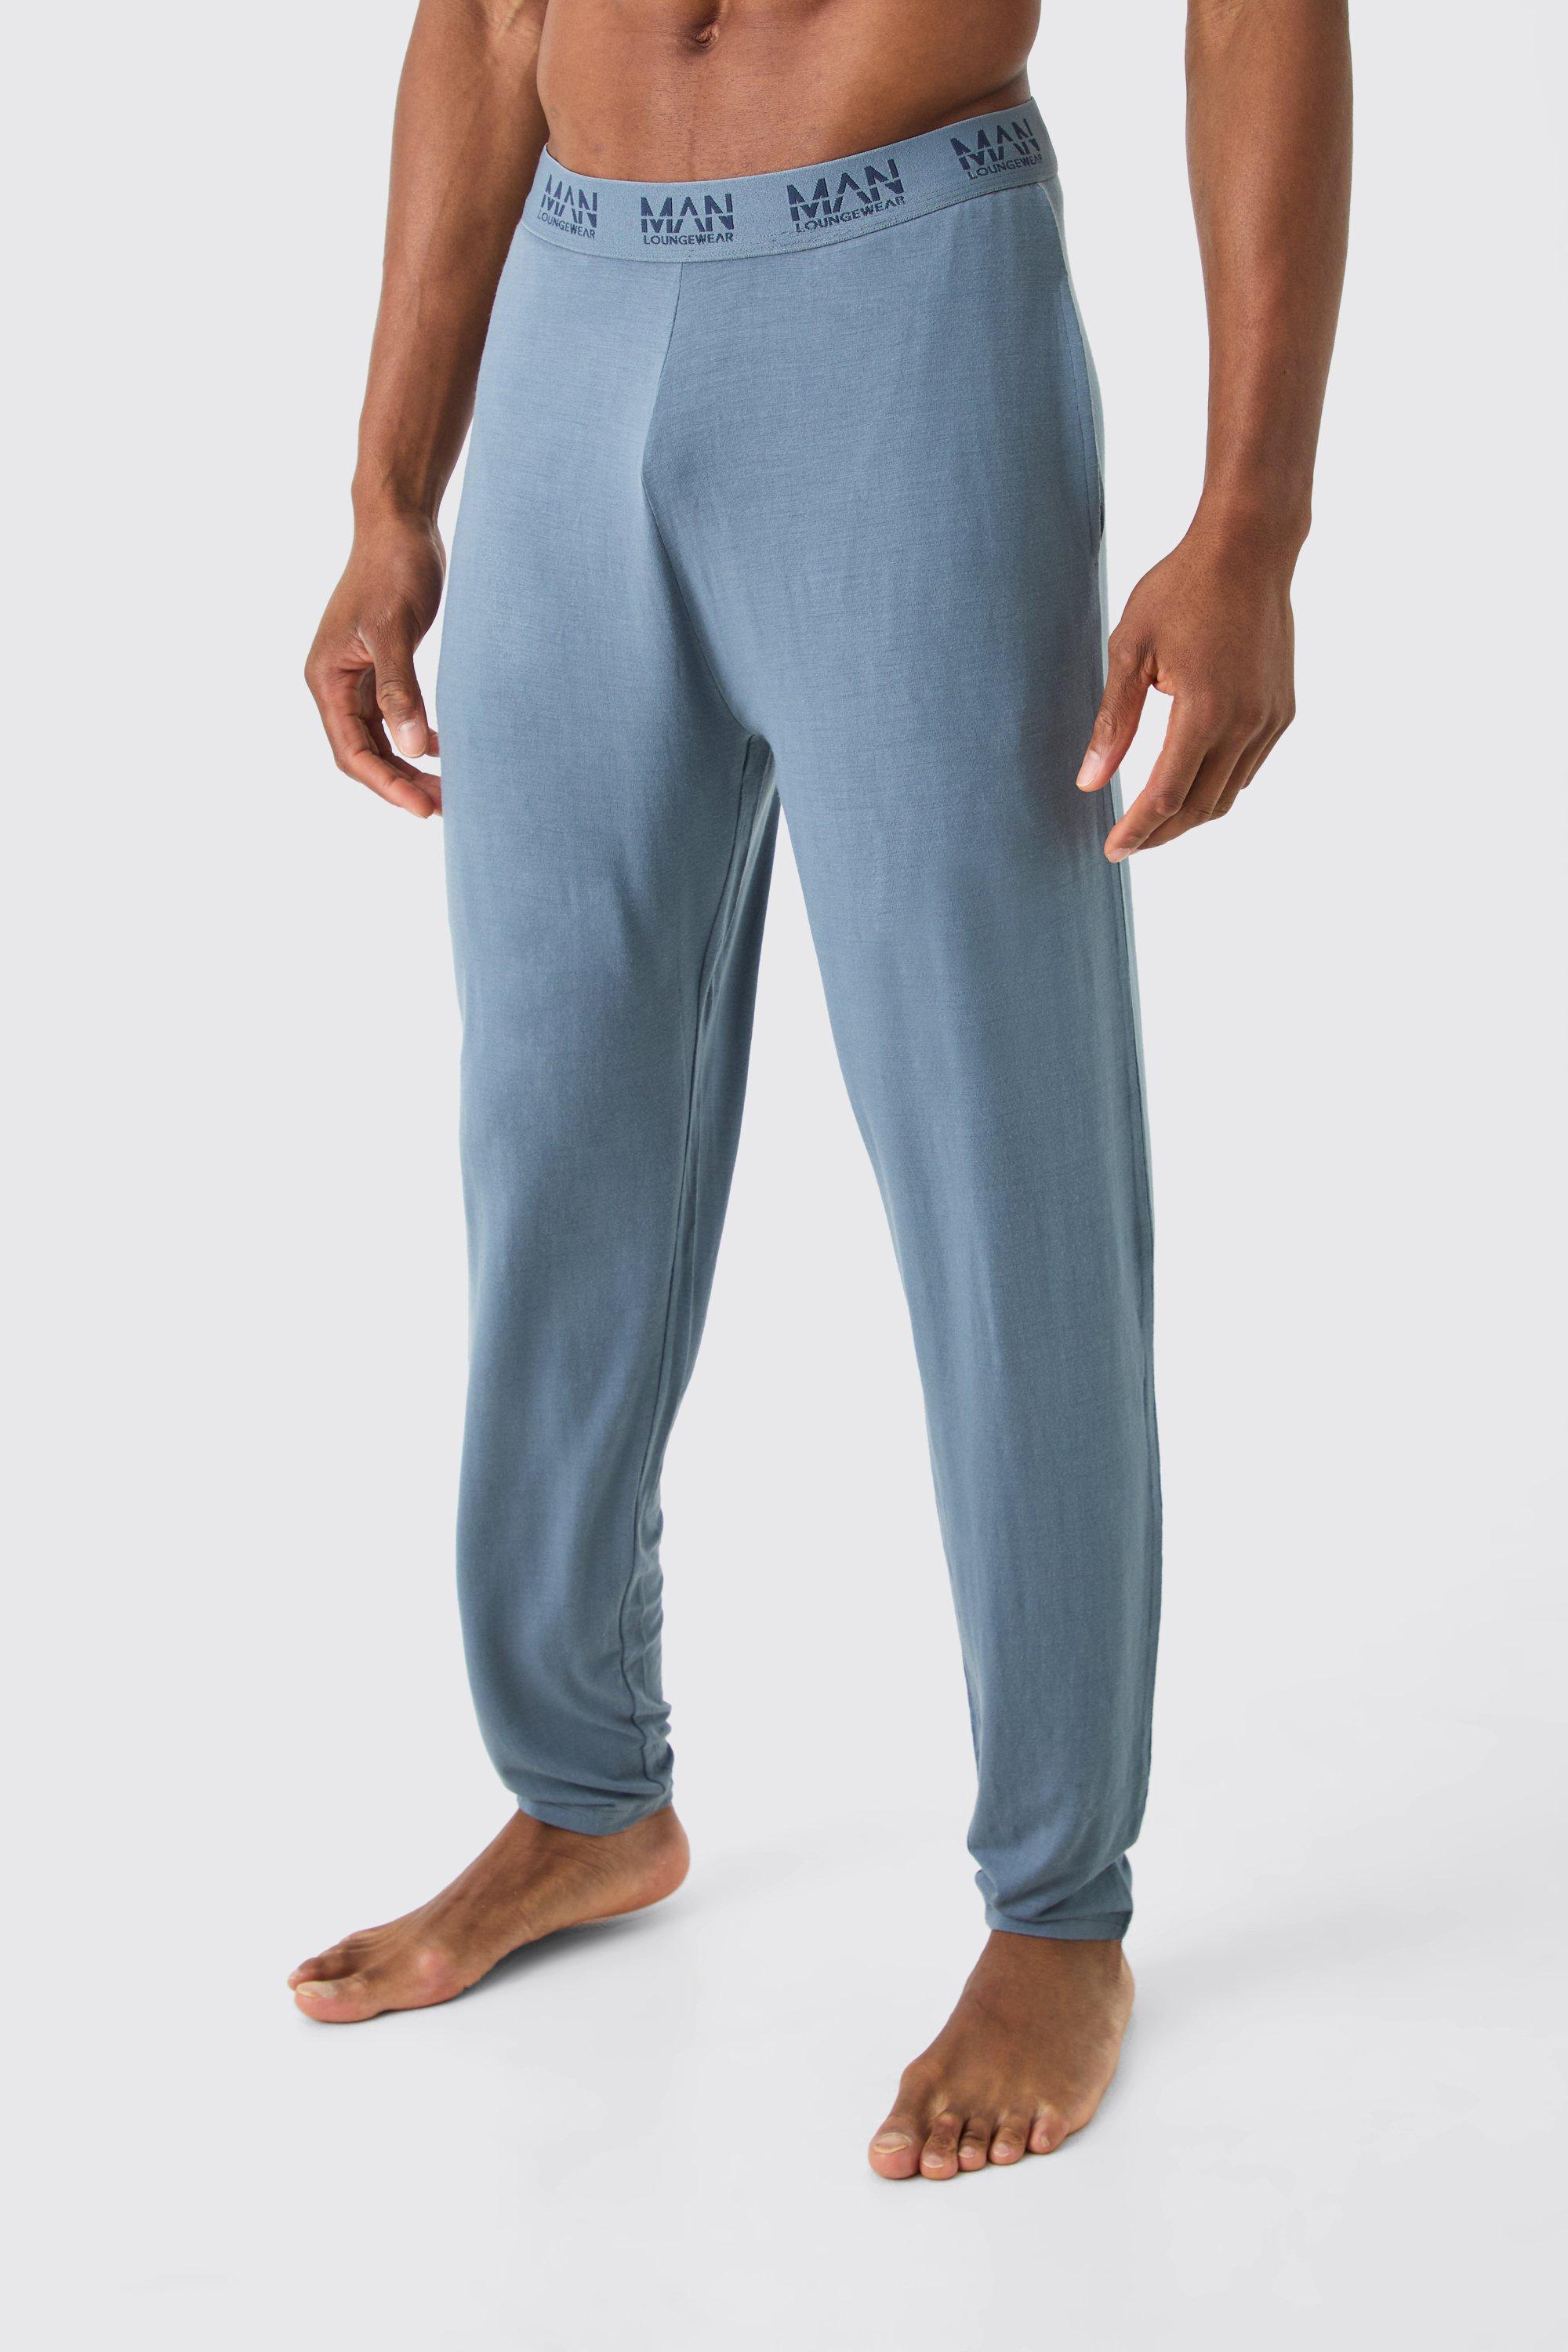 Image of Premium Modal Mix Relaxed Fit Lounge Bottoms, Azzurro